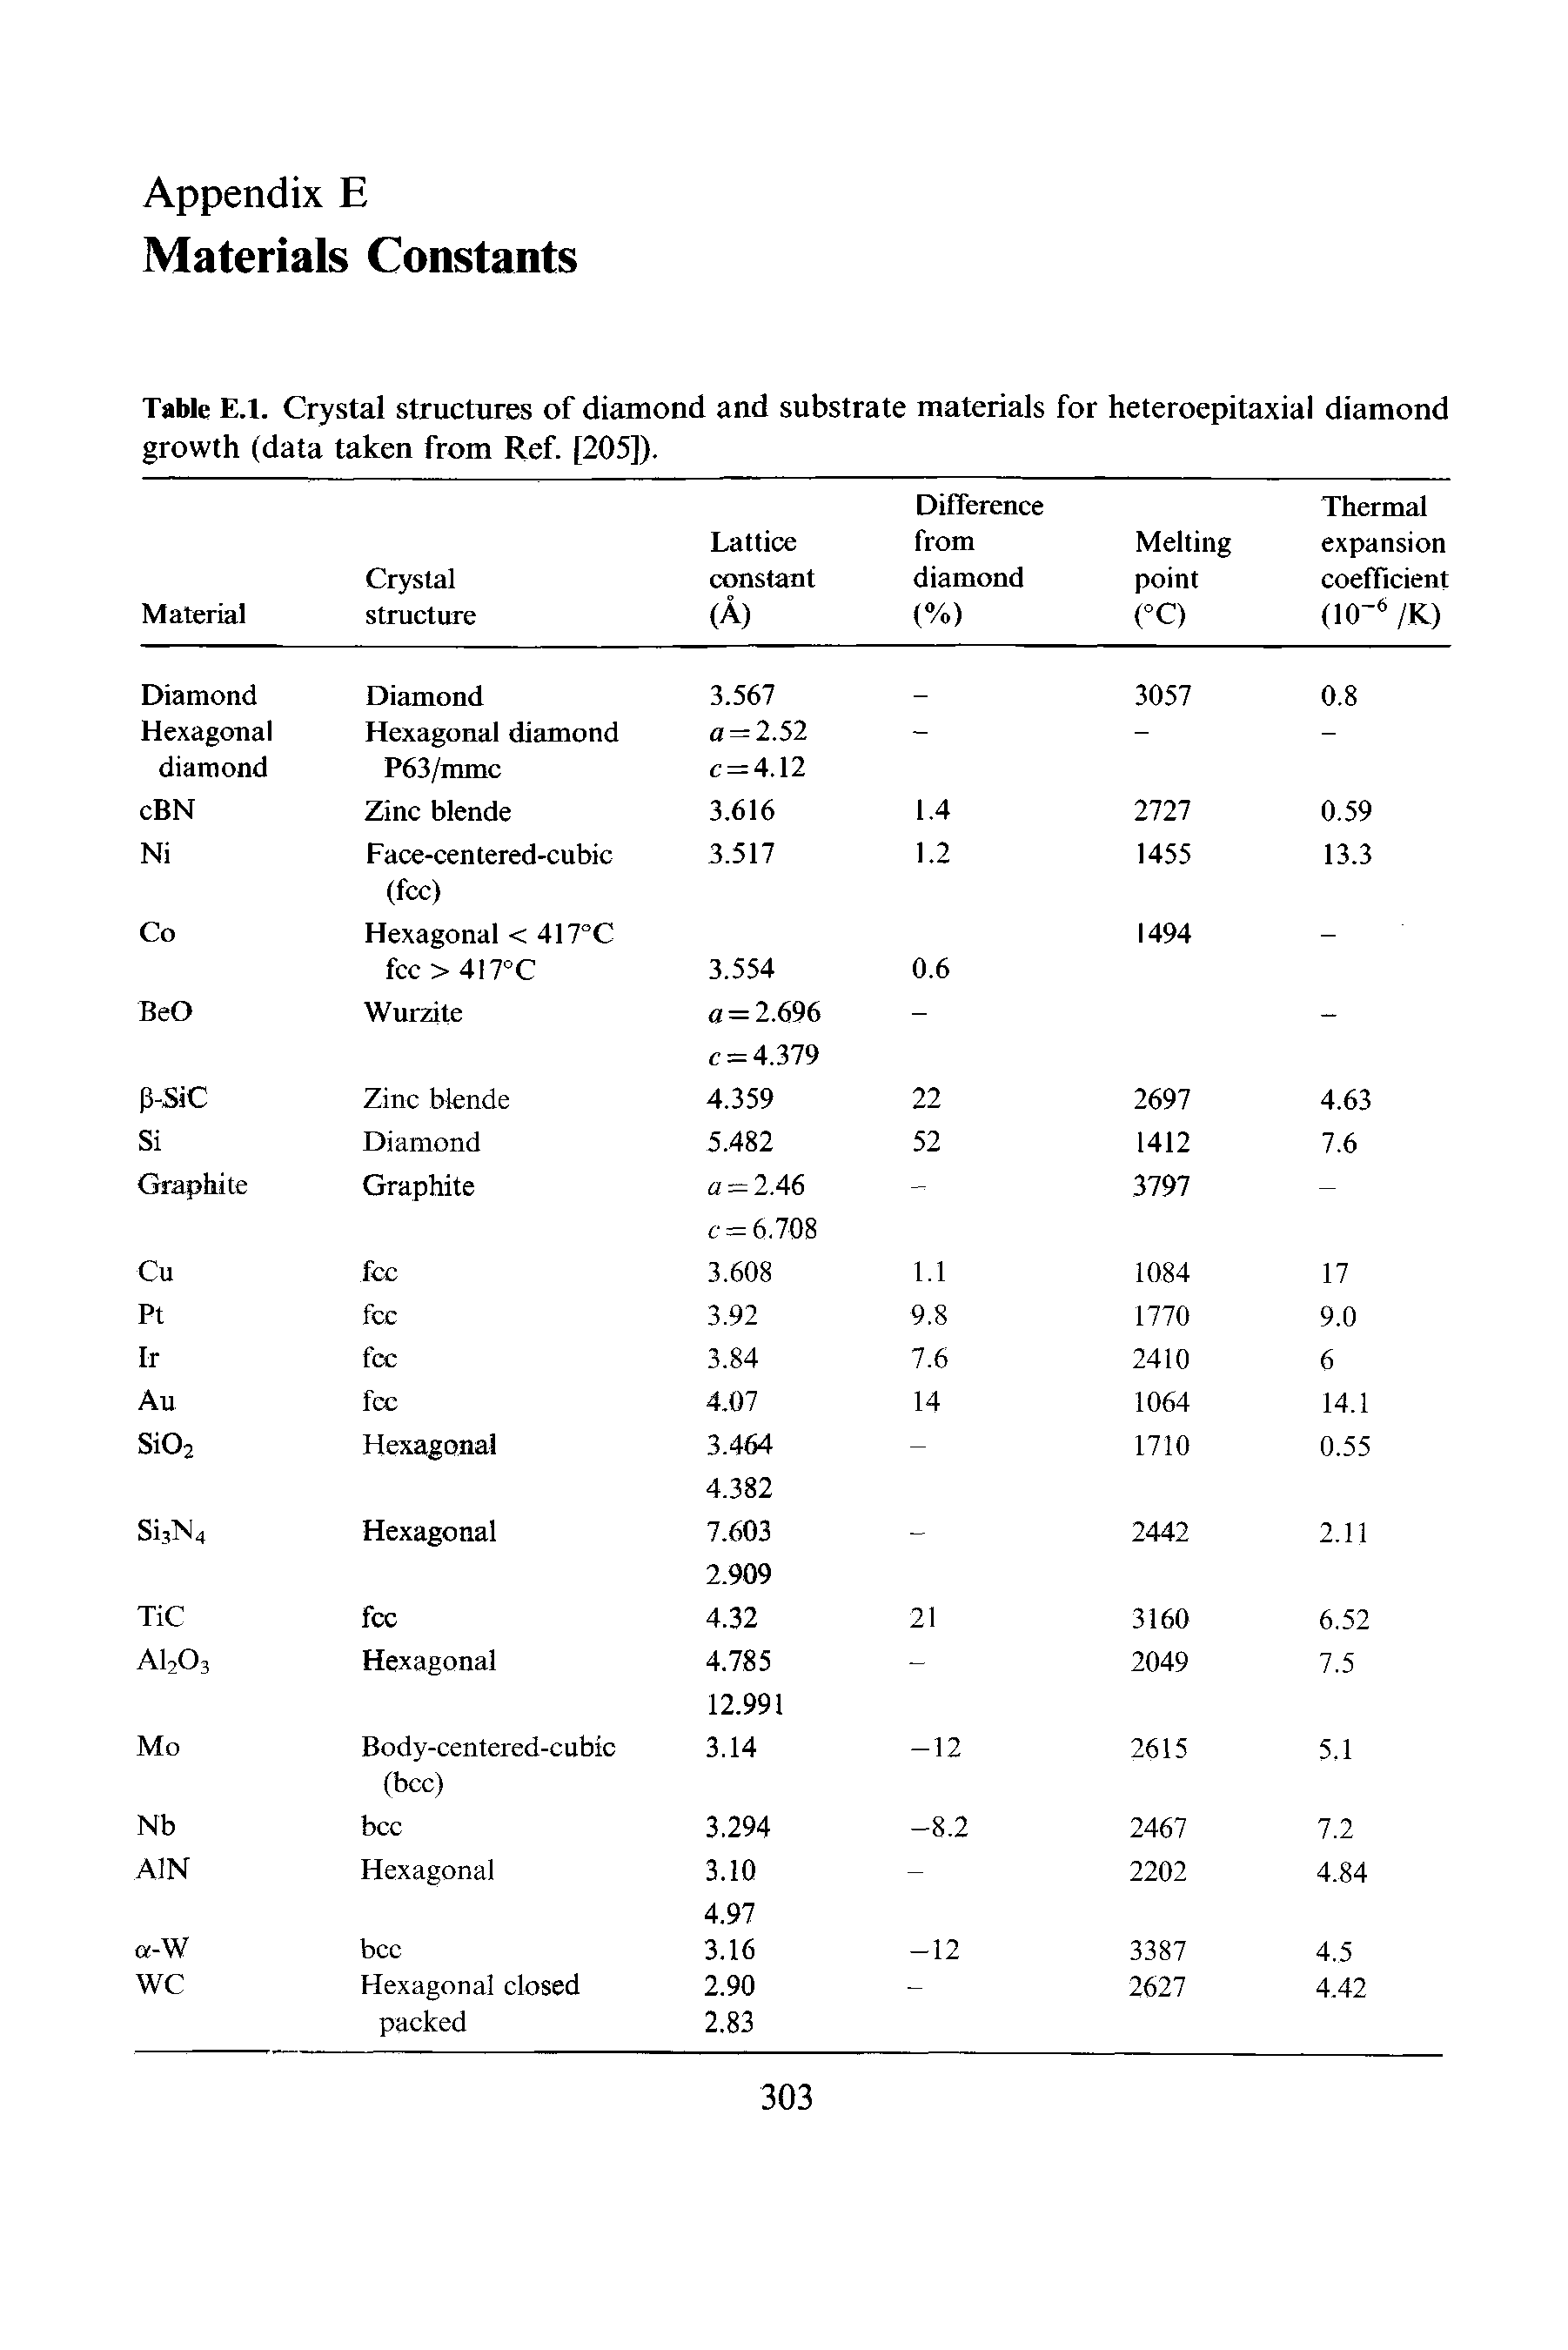 Table E.l. Crystal structures of diamond and substrate materials for heteroepitaxial diamond growth (data taken from Ref. [205]).